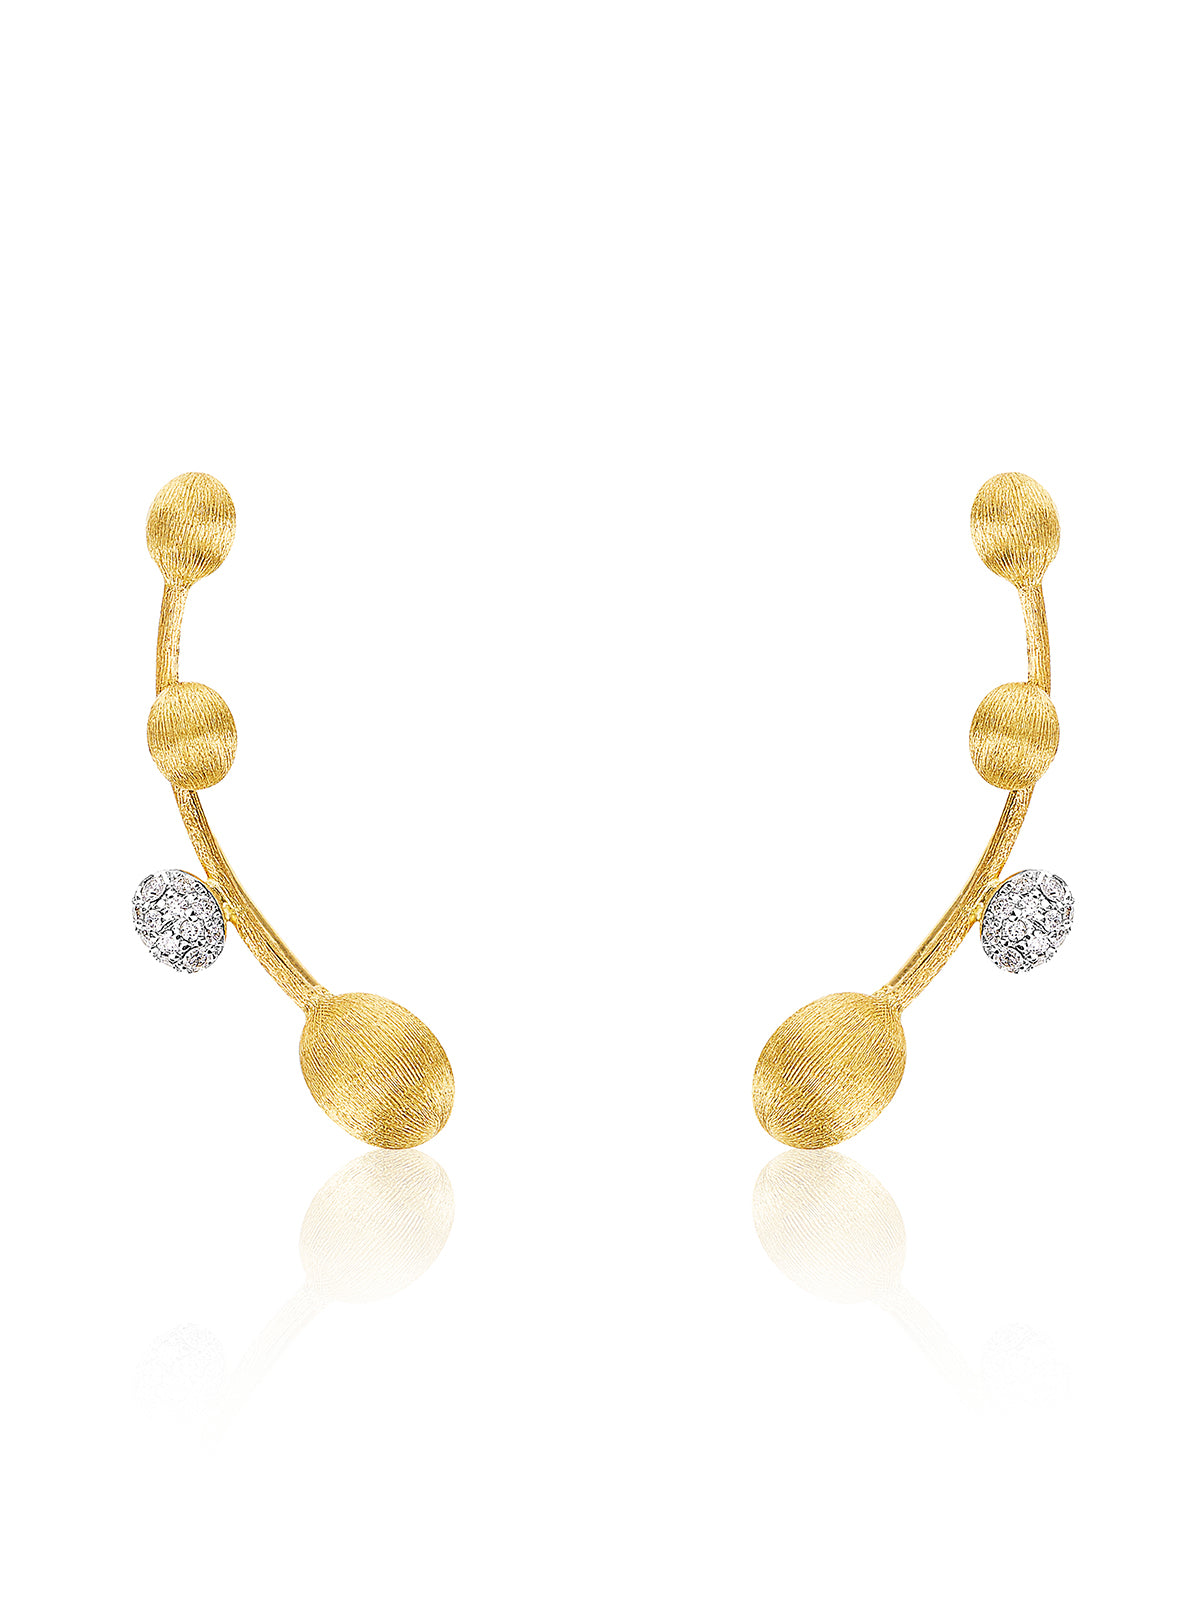 "Elite" Gold and Diamonds Twig-shaped Earrings